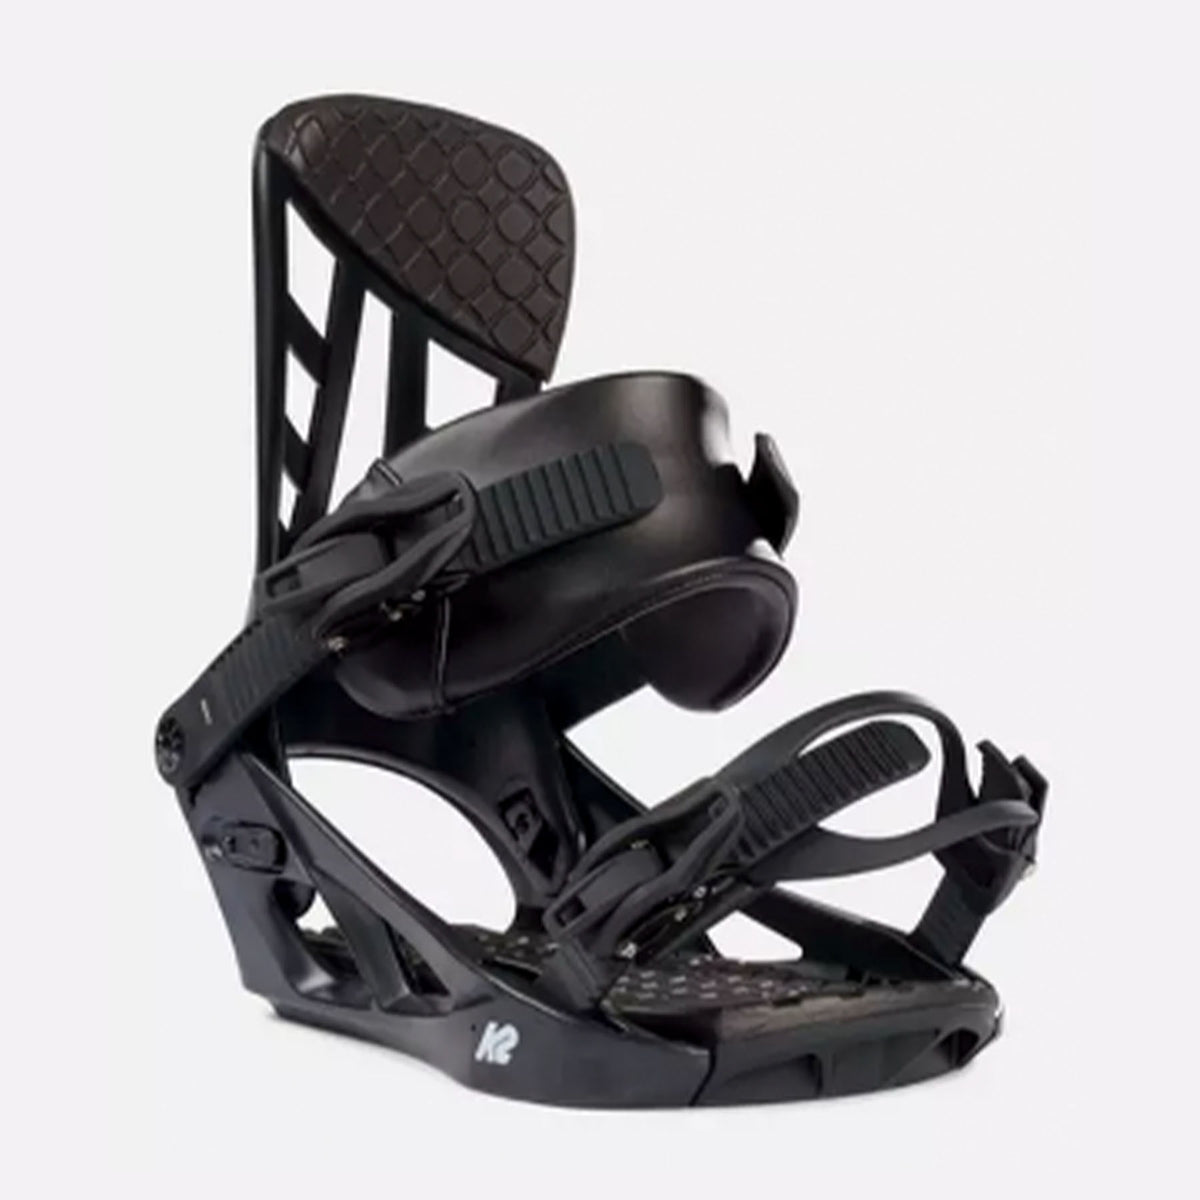 Image features the K2 Indy snowboard binding in black.